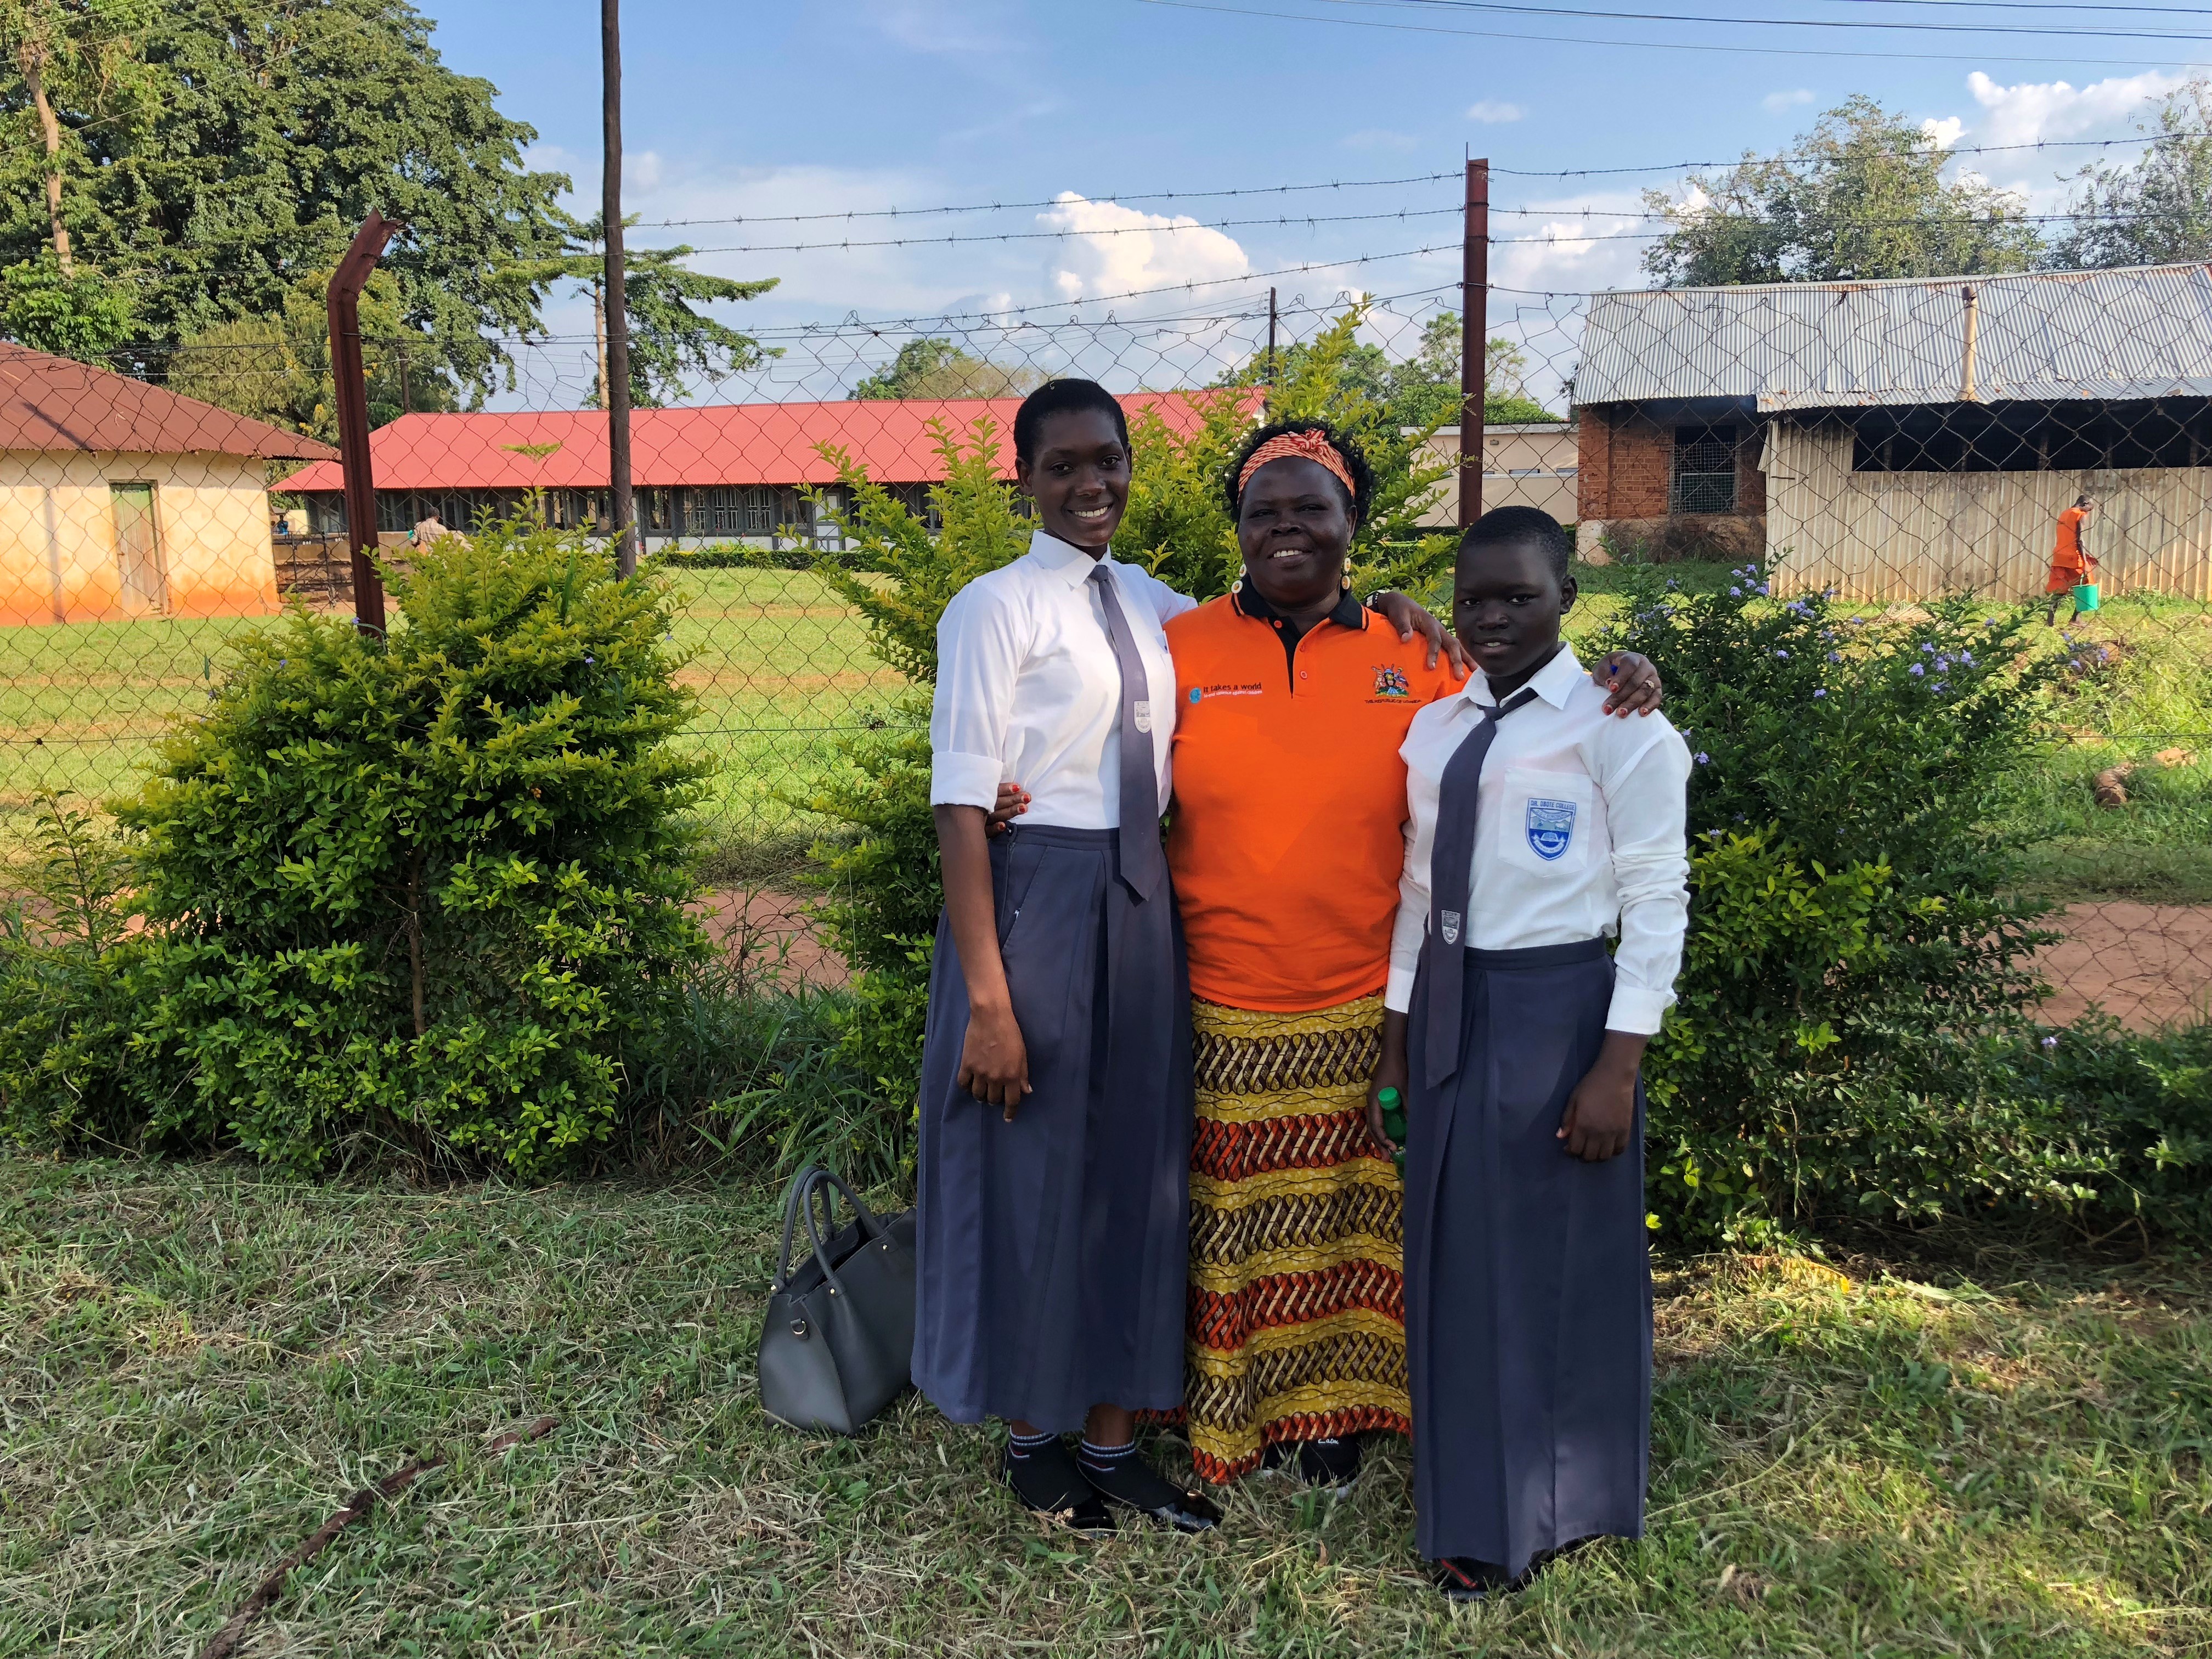 Pricilia is going against the tide to pursue big DREAMS for girls’ education in Uganda